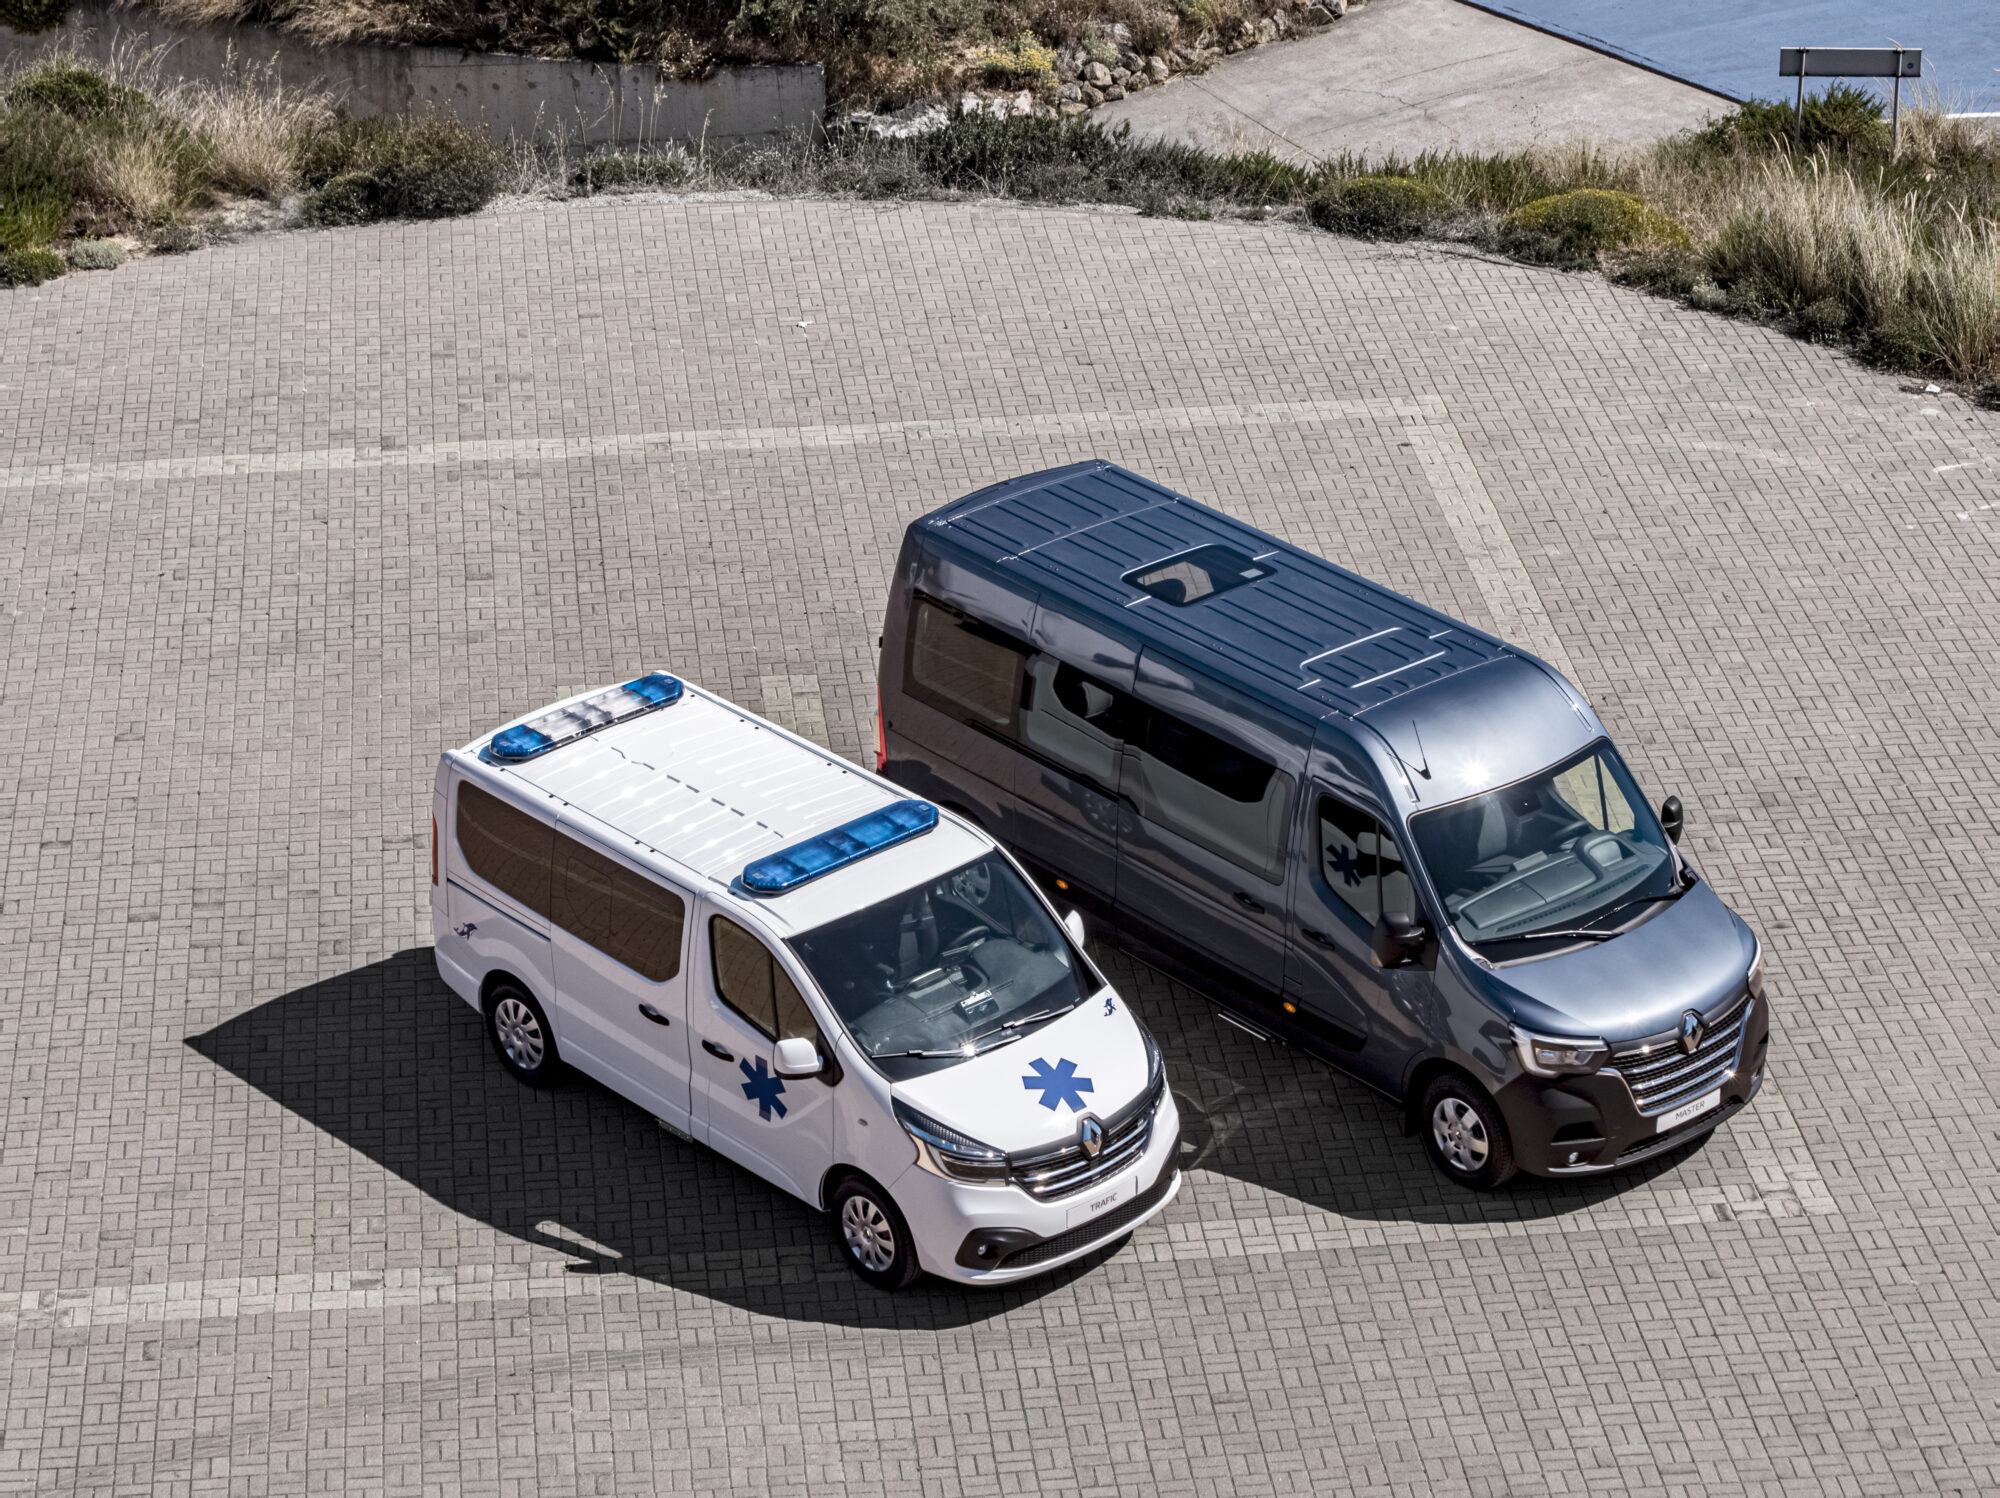 2019 - New Renault MASTER and New Renault TRAFIC